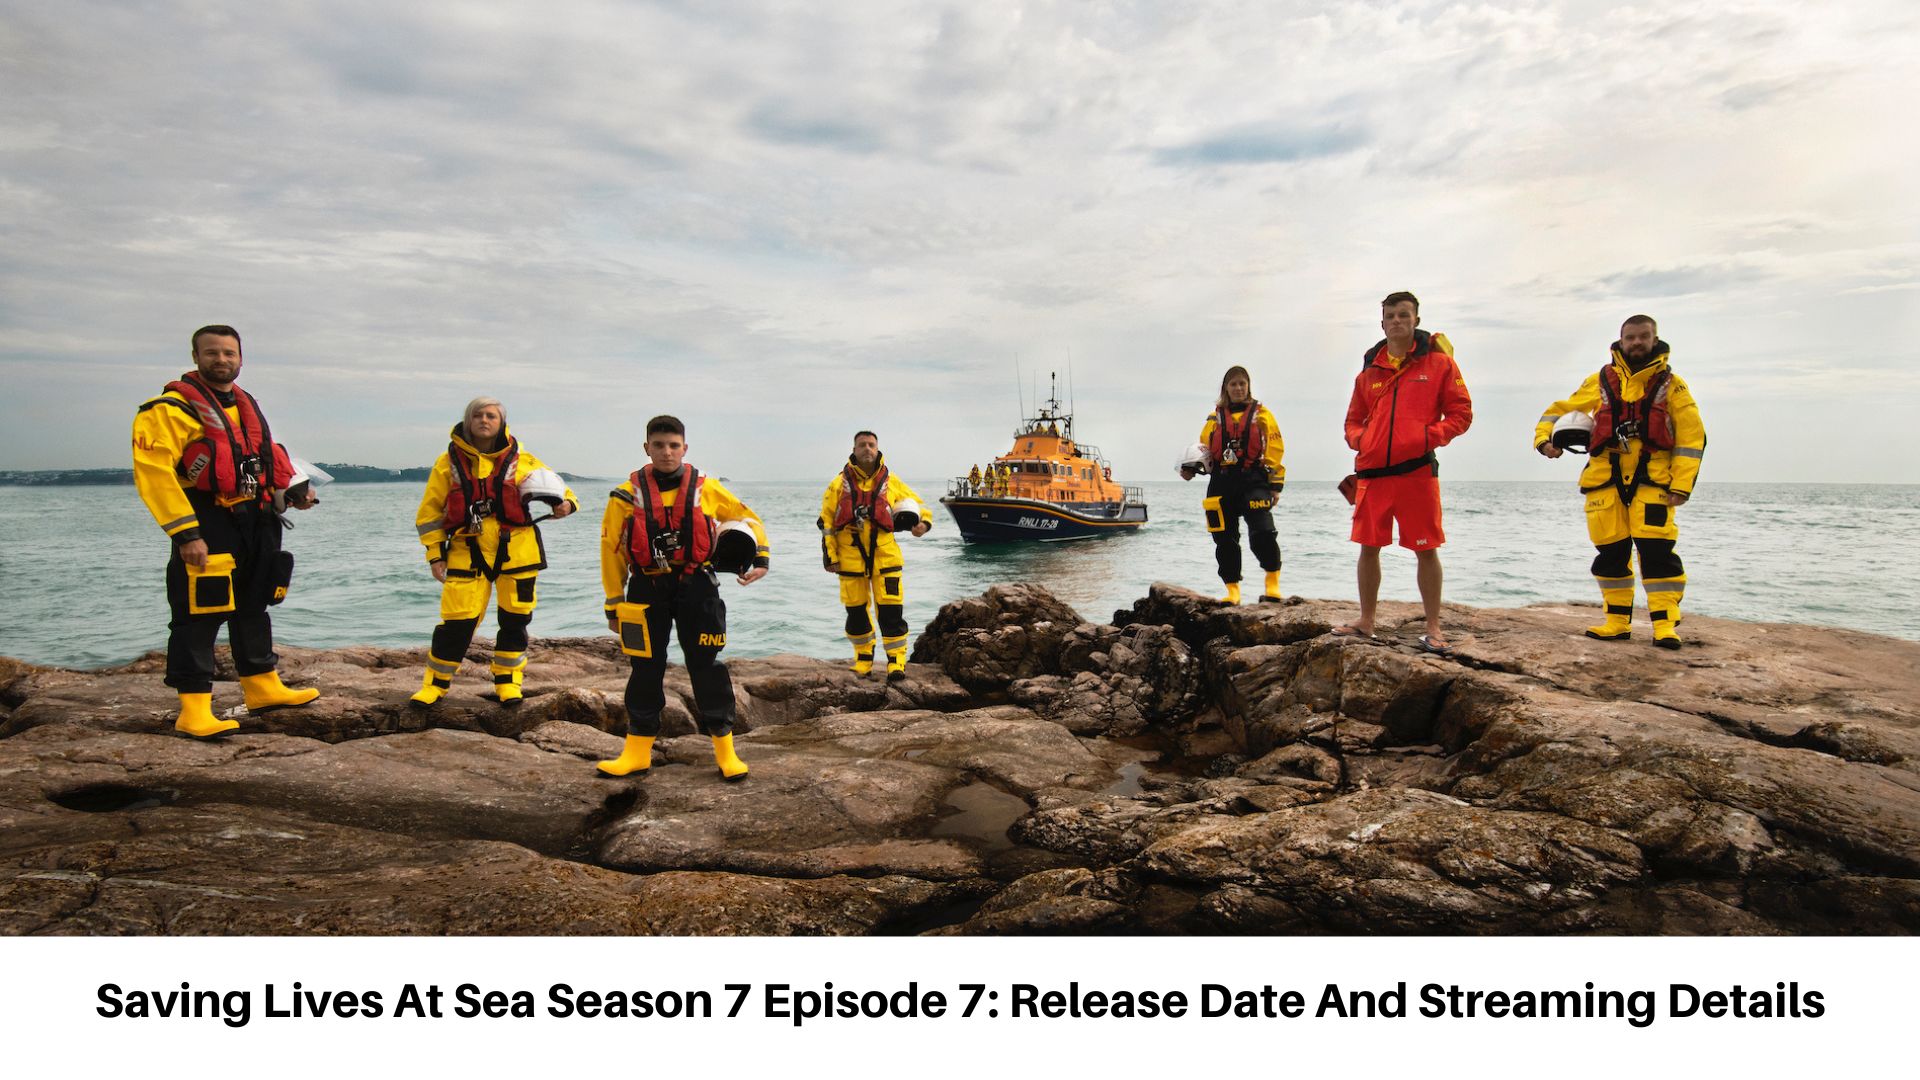 Saving Lives At Sea Season 7 Episode 7: Release Date And Streaming Details